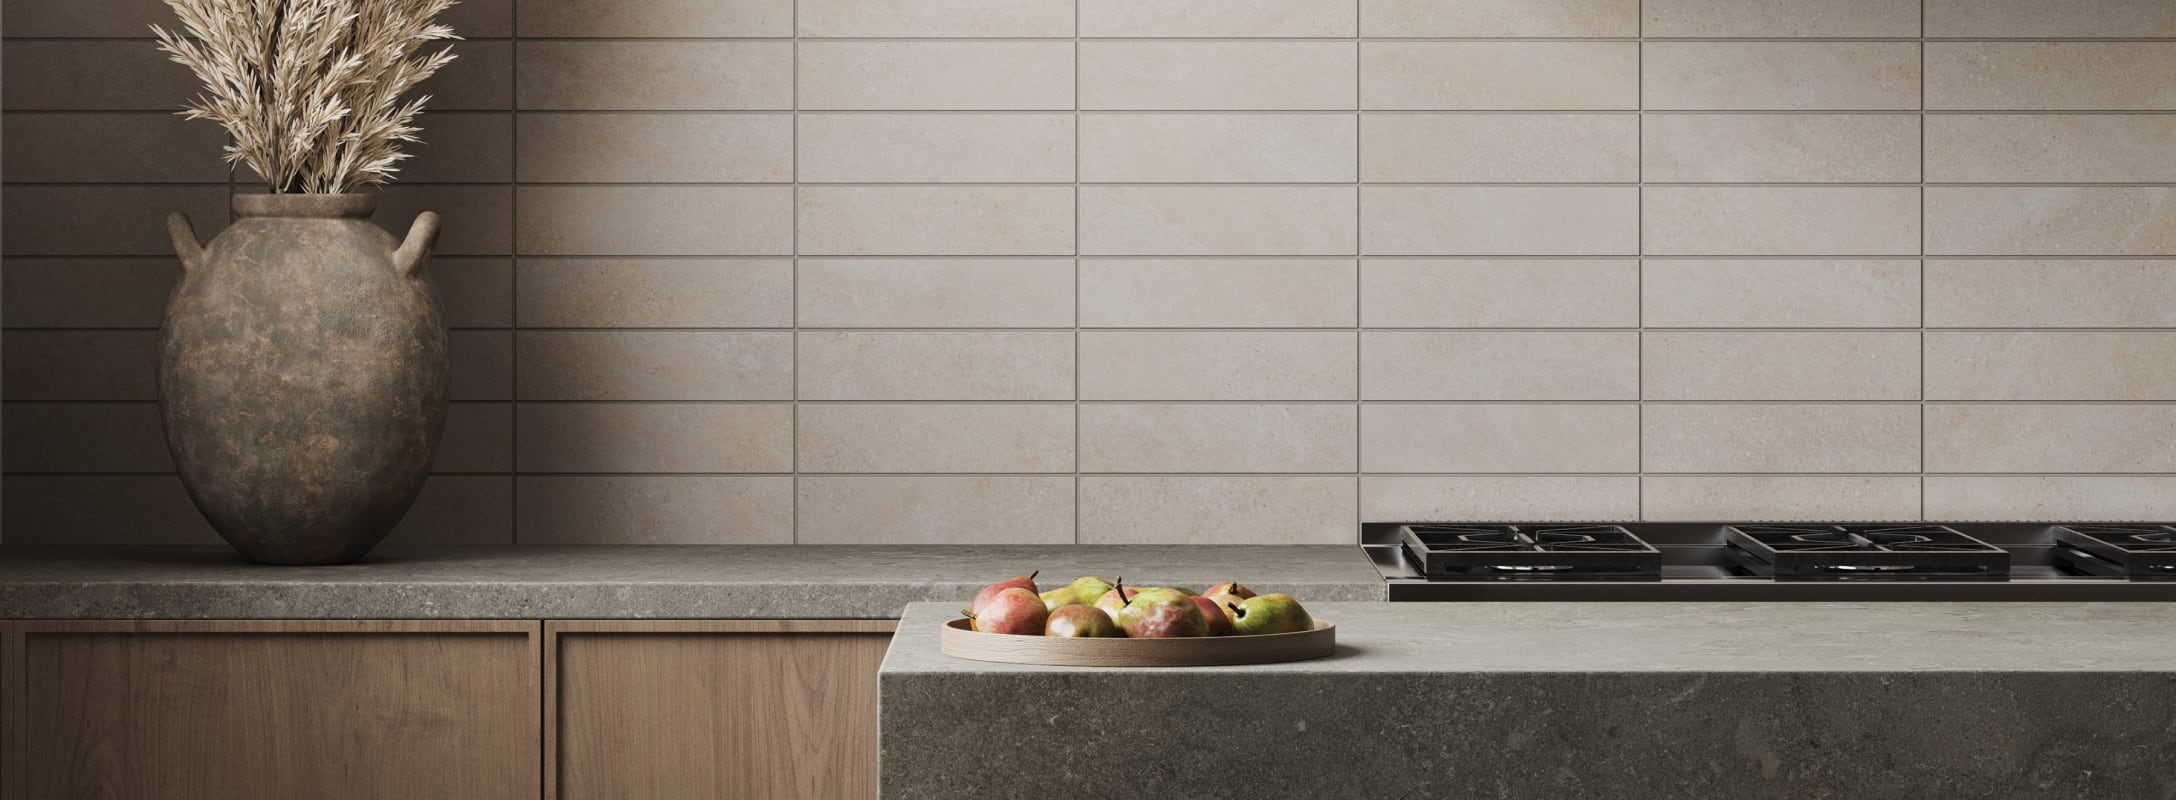 Modern 3x12 Tiles create a chic kitchen backsplash, adding a contemporary touch to culinary spaces.